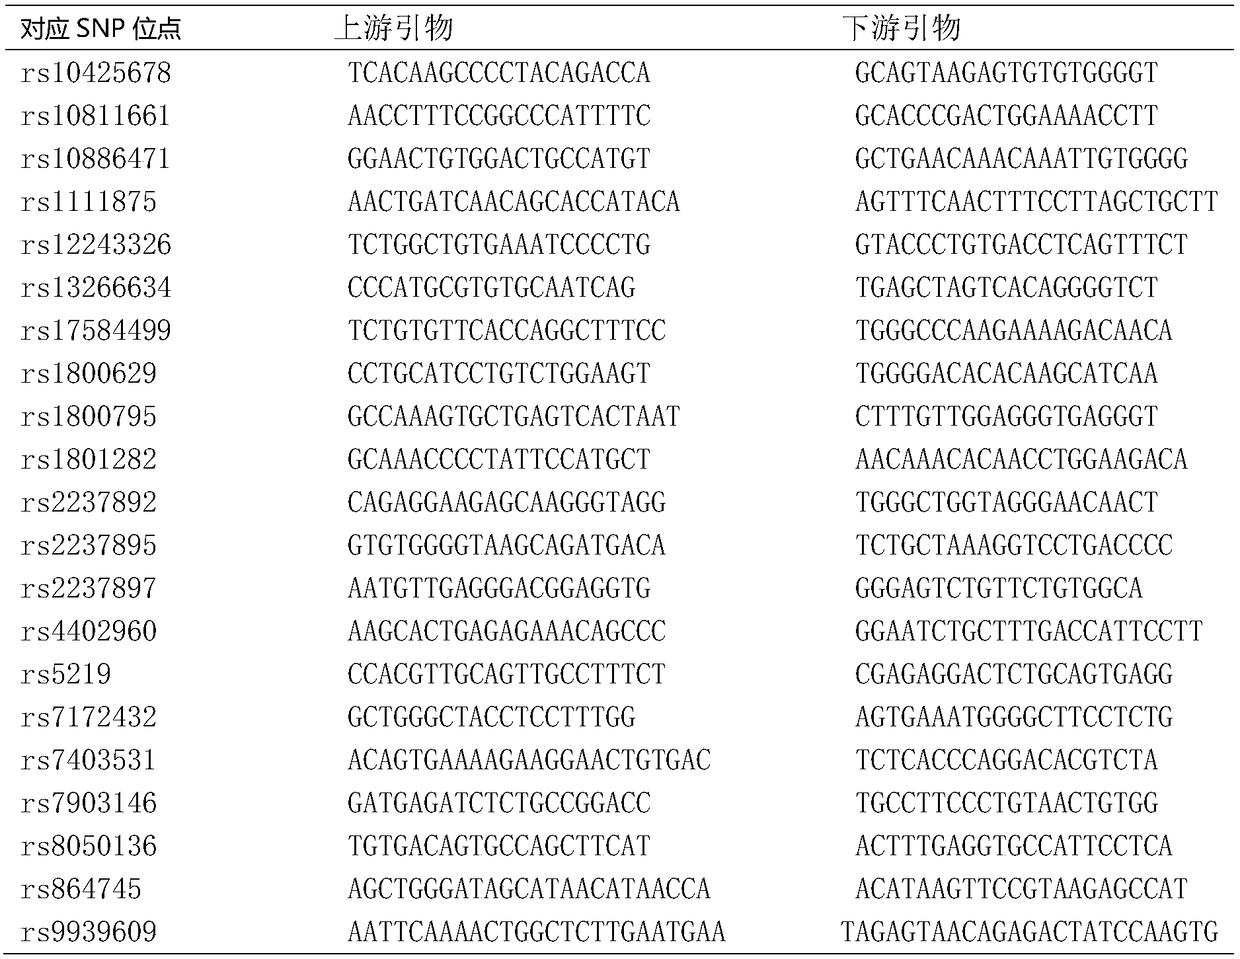 Combination of mutation sites for detection of type 2 diabetes susceptibility genes, detection primers and applications